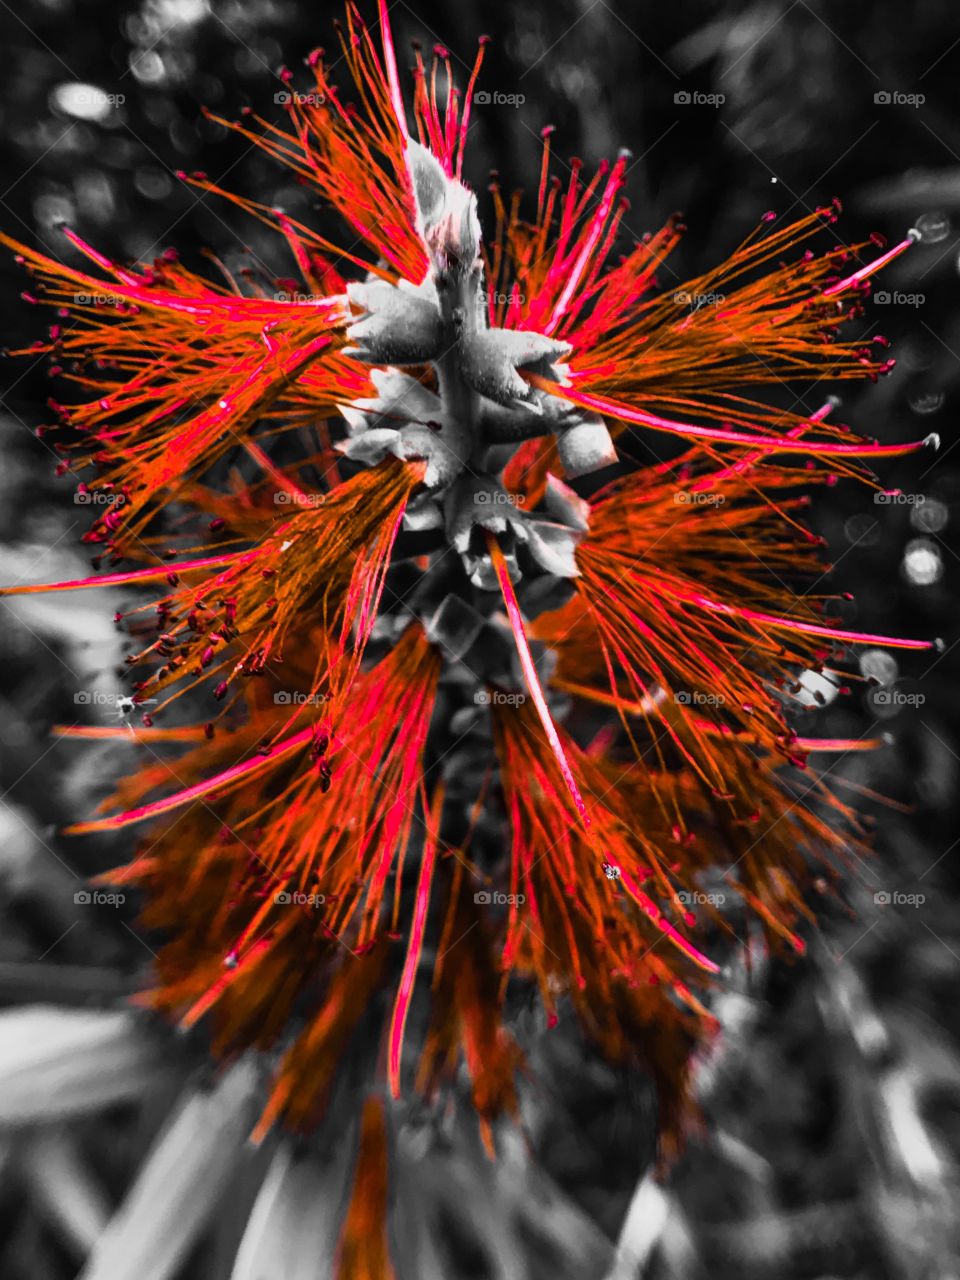 Red plant